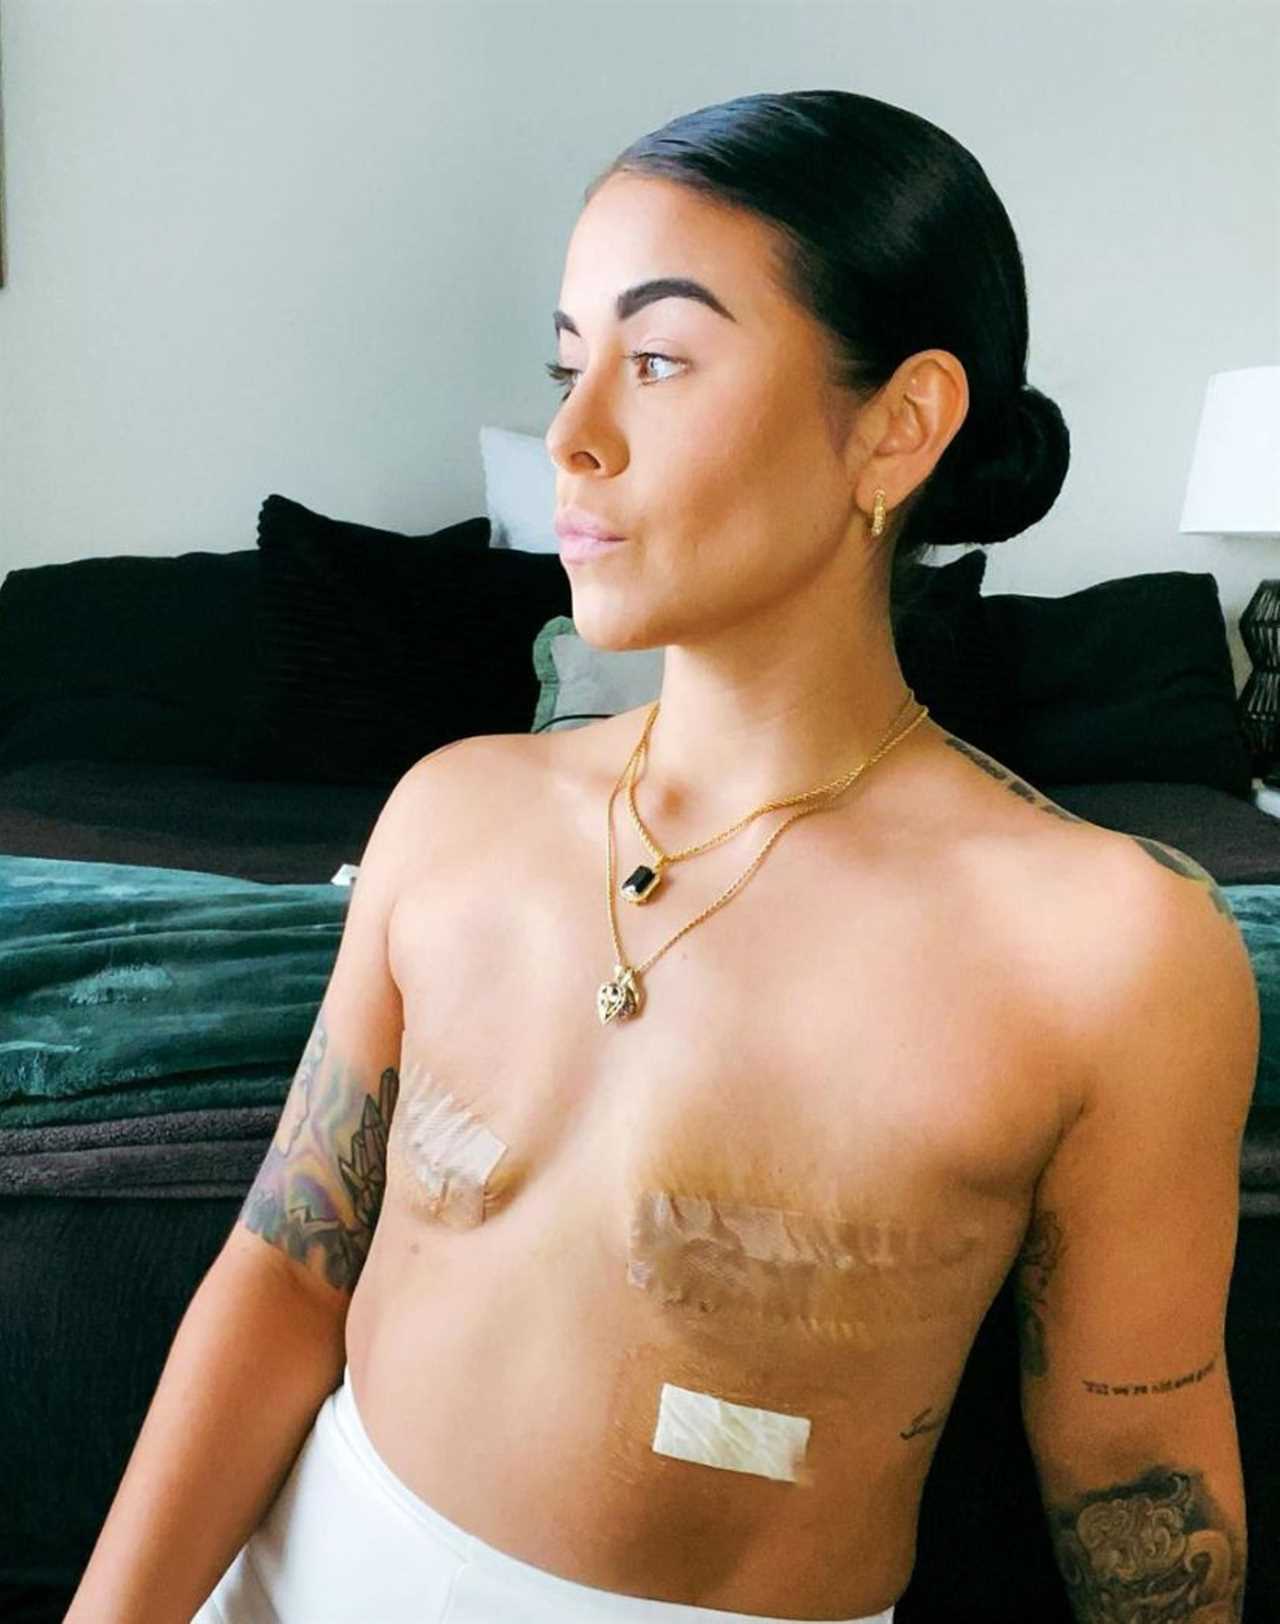 I had both boobs removed at just 28 even though I don’t have cancer – it makes me unique and I love it